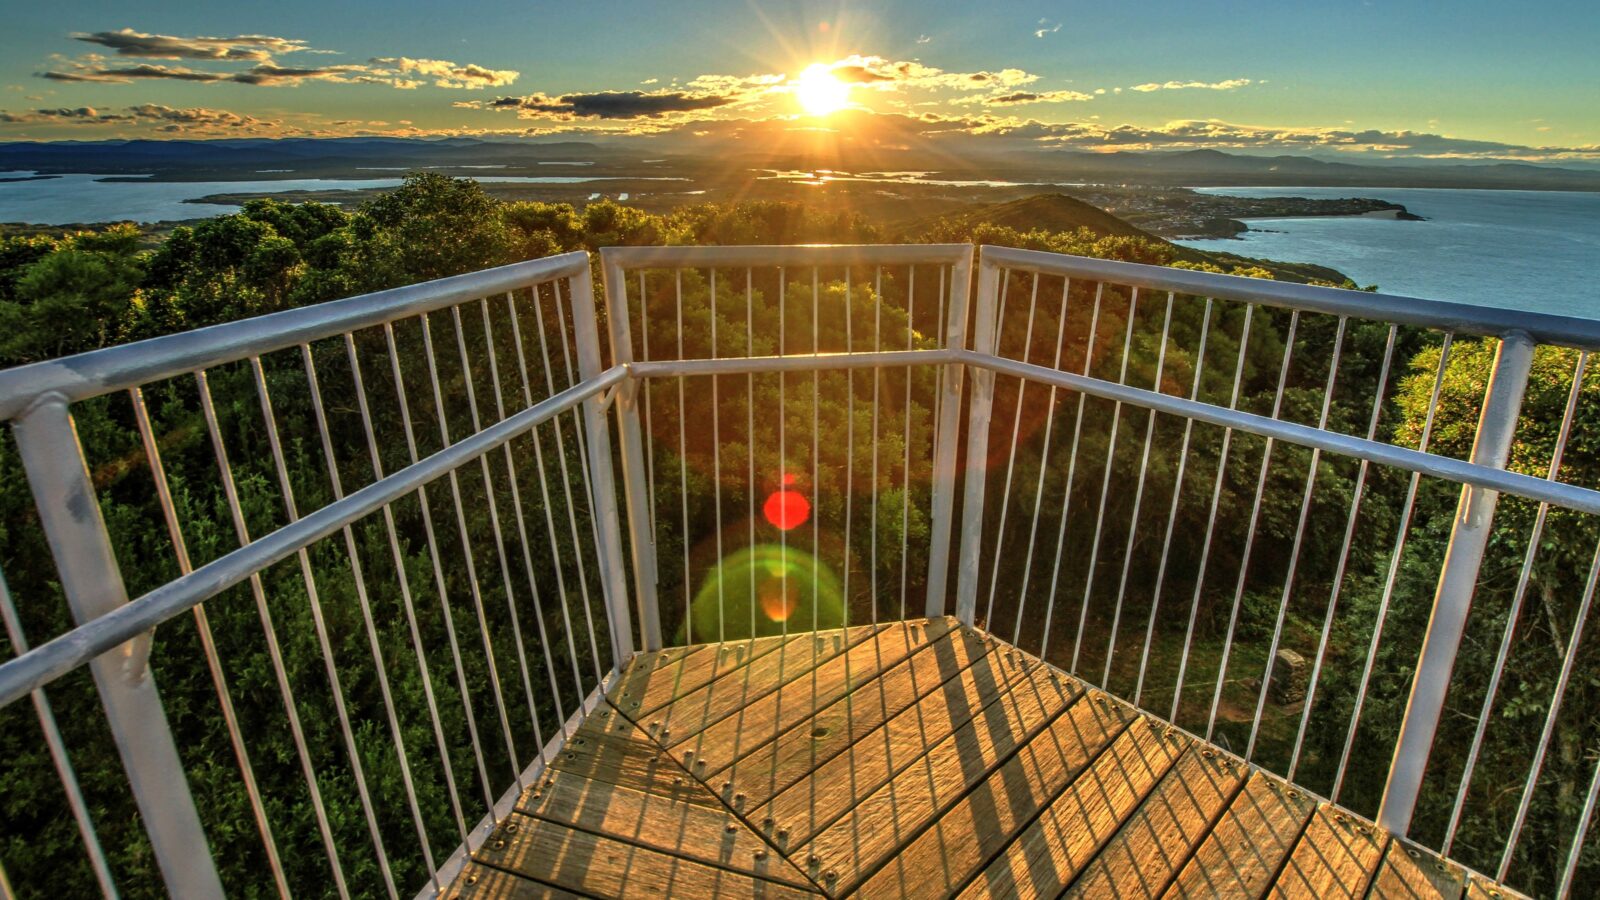 Cape Hawke Lookout Booti Booti National Park Forster